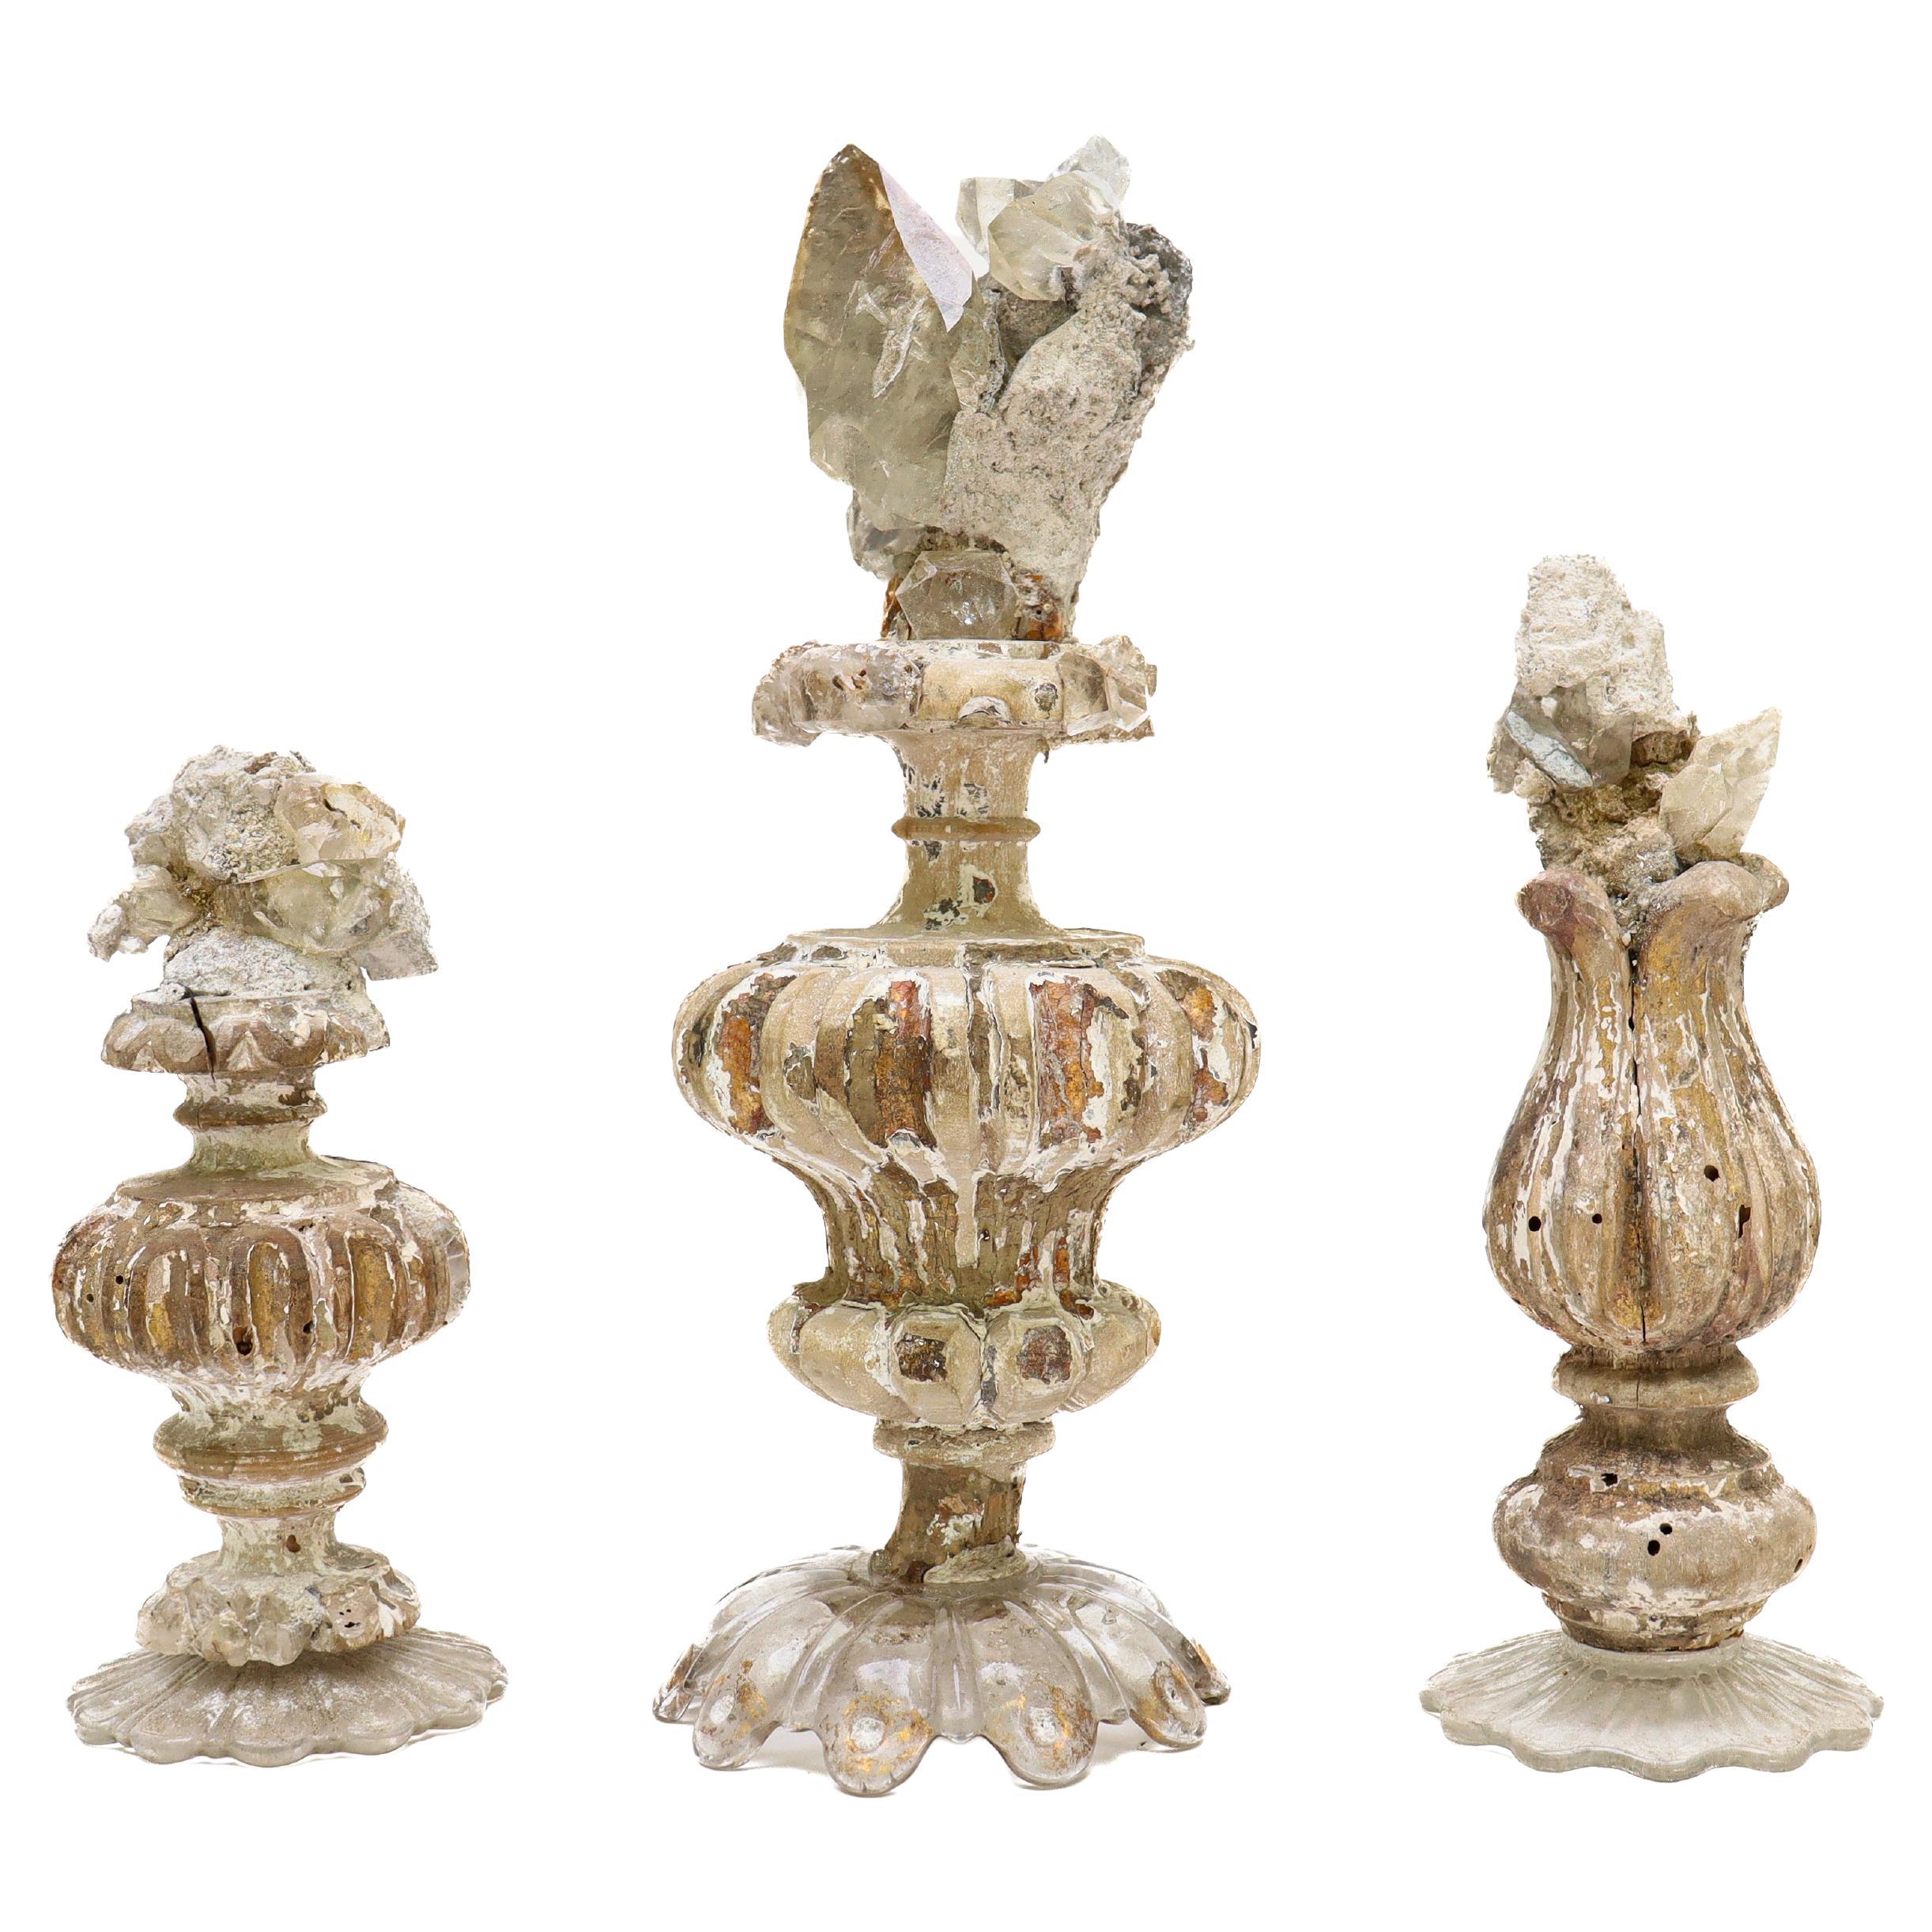 17th Century Italian Fragments 'Group of Three' with Calcite Crystals on Bobeche